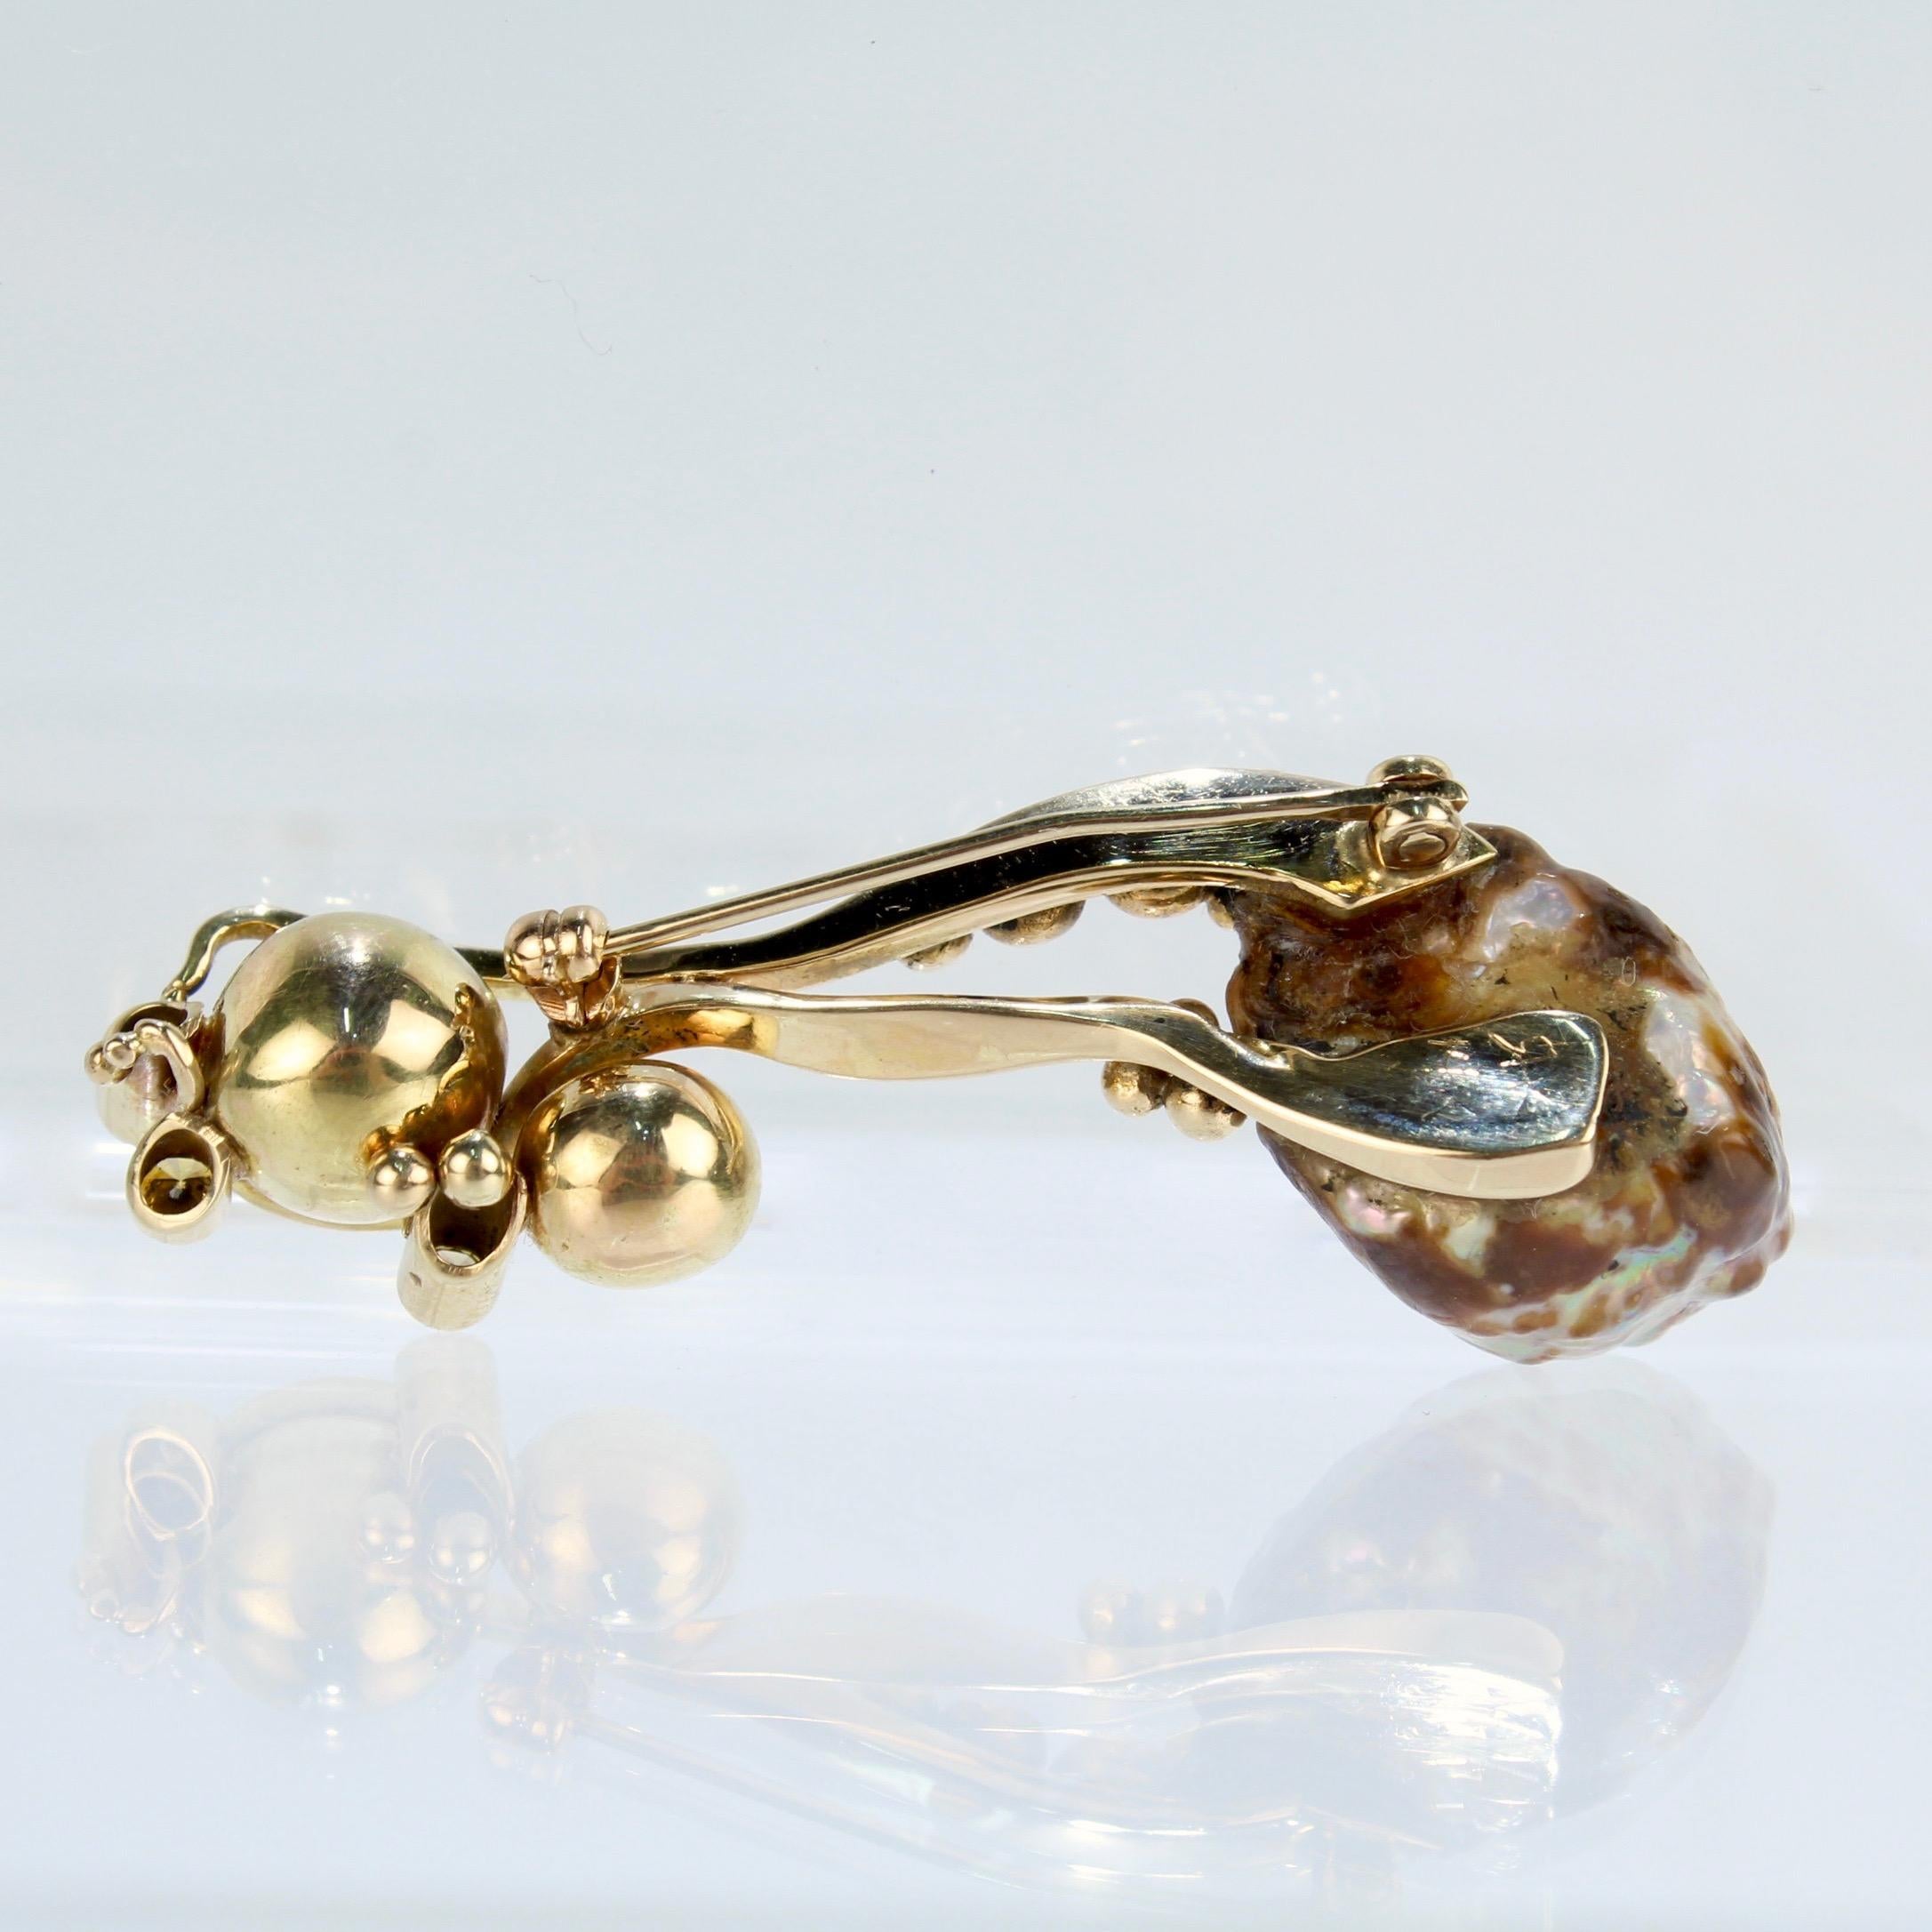 Modernist Biomorphic 14 Karat Gold Yellow Diamond & Baroque Pearl Brooch or Pin For Sale 5